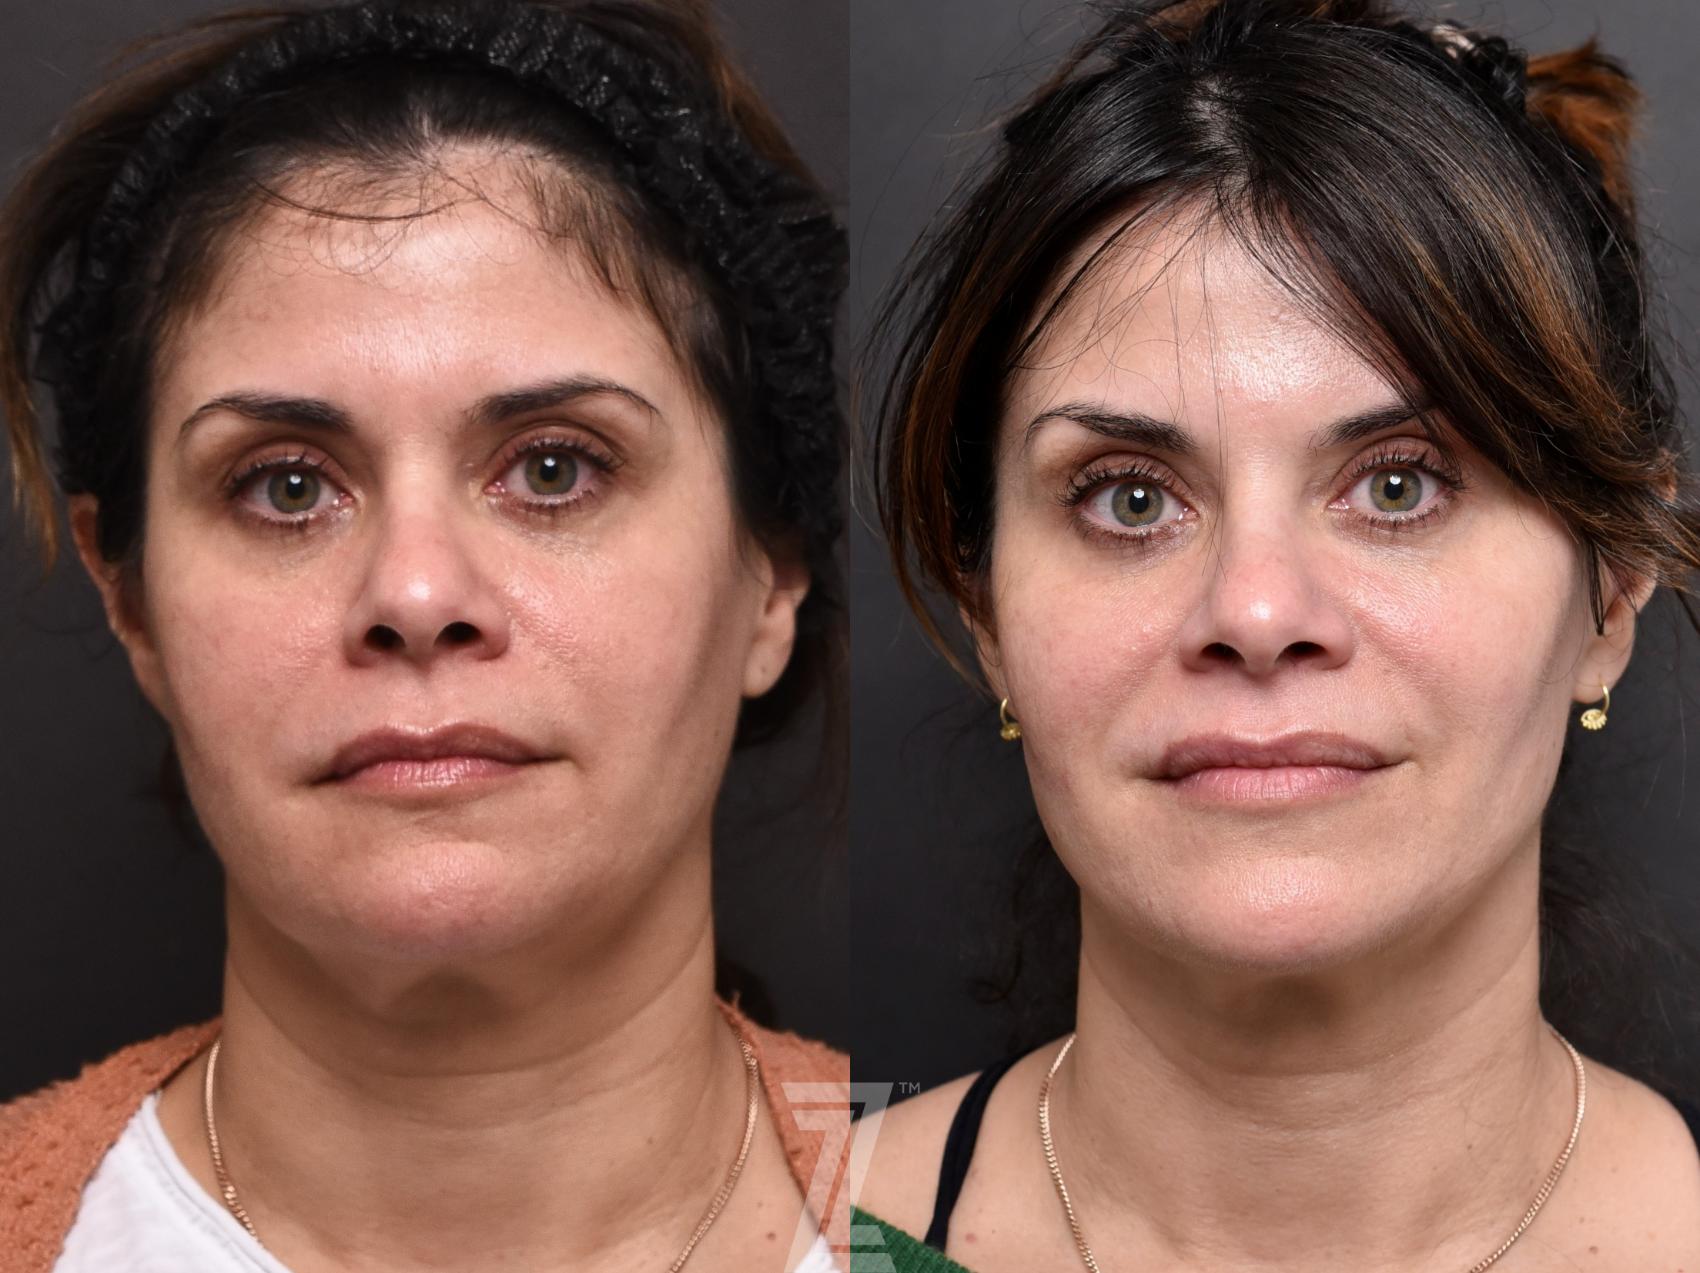 Botox, visia skin analysis, Neurotoxin, Dysport, Before and After, B&A, Tummy Tuck, Breast Aug, Breast Lift, Mastopexy, MMO, Mommy Makeover, Dr. Rocco Piazza, The Piazza Center, Austin, Tx, Halo, BBLlaser